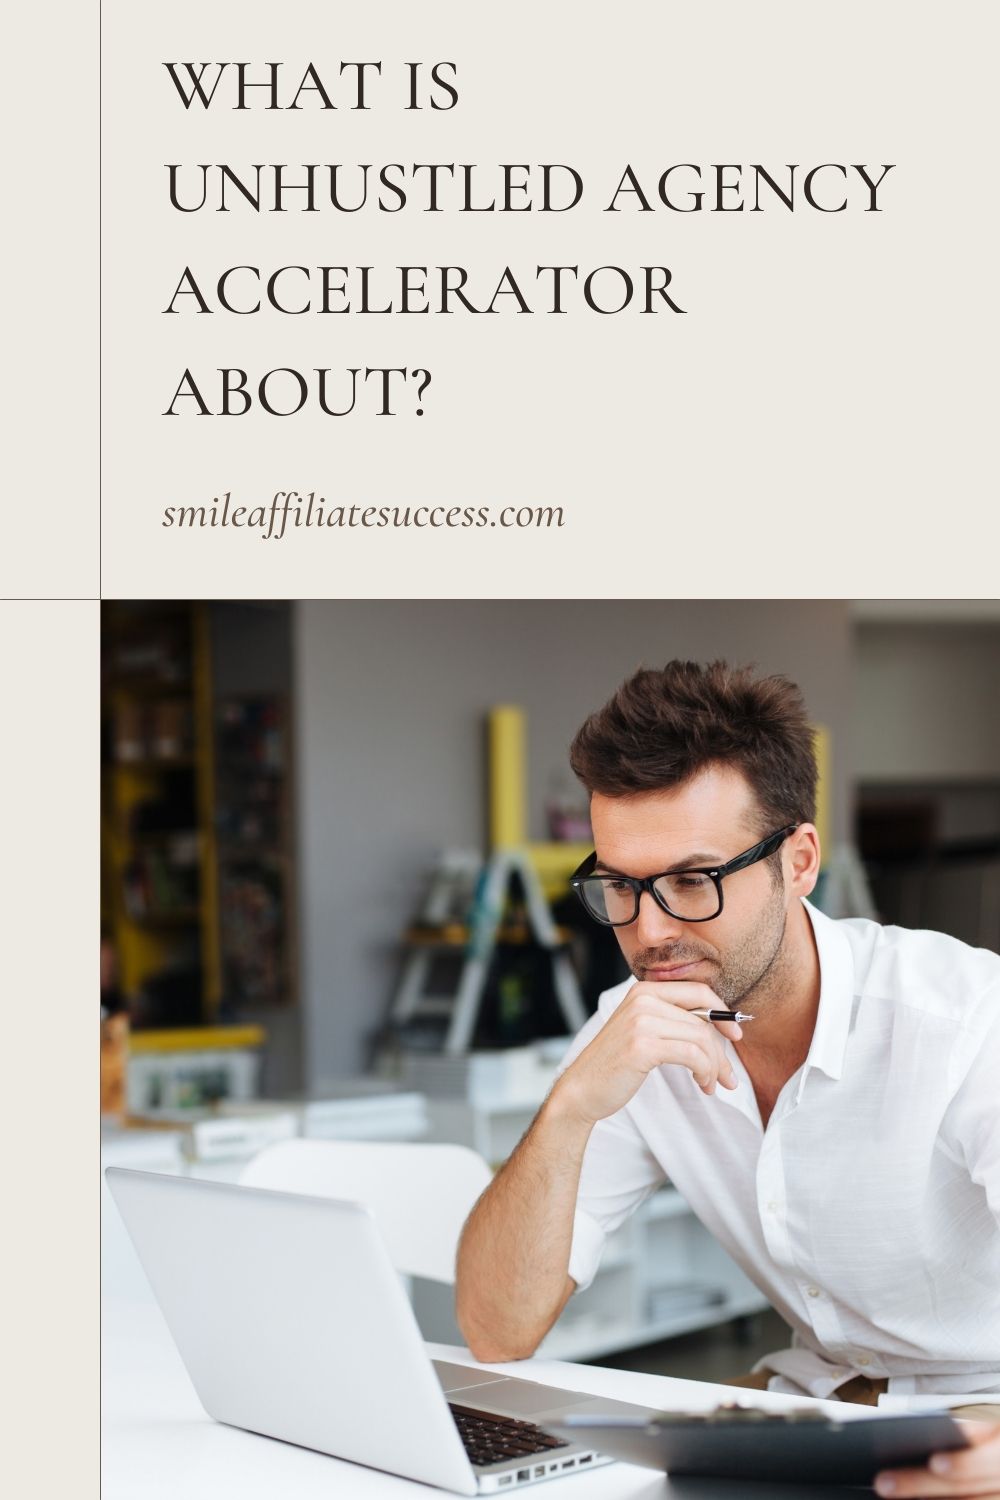 What Is UnHustled Agency Accelerator About?